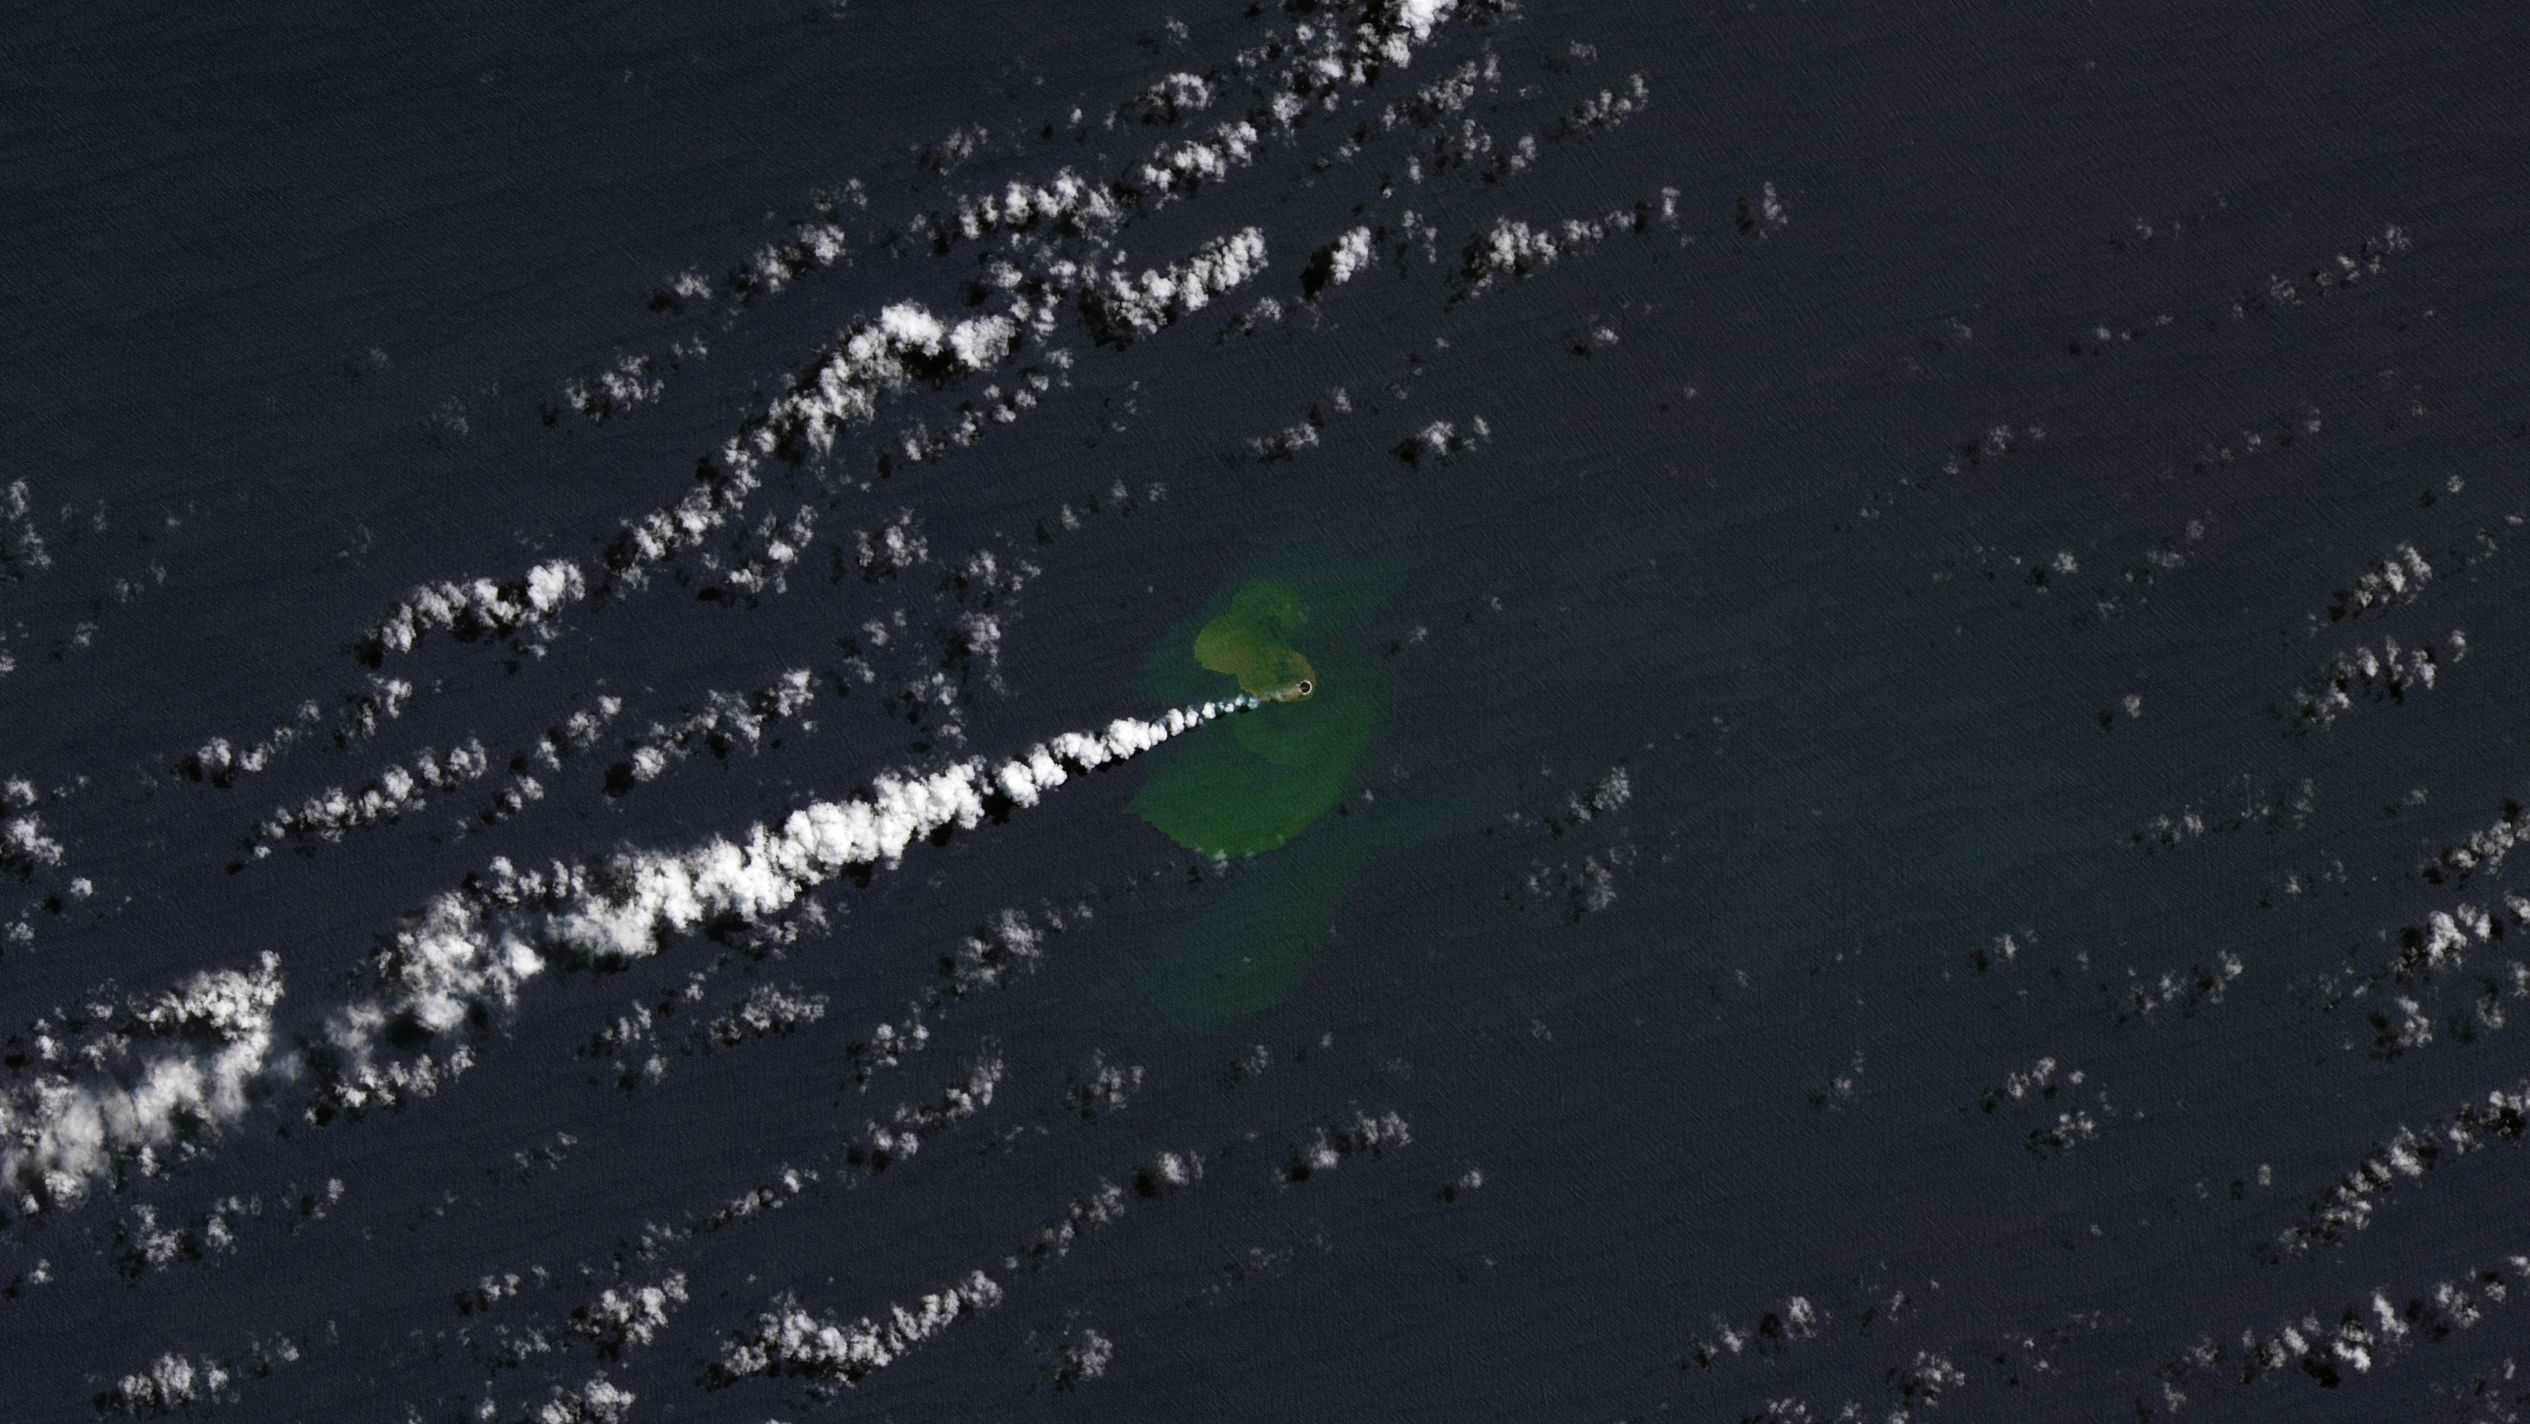 The tiny island appeared in central Tongo after an underwater volcano erupted earlier this month.